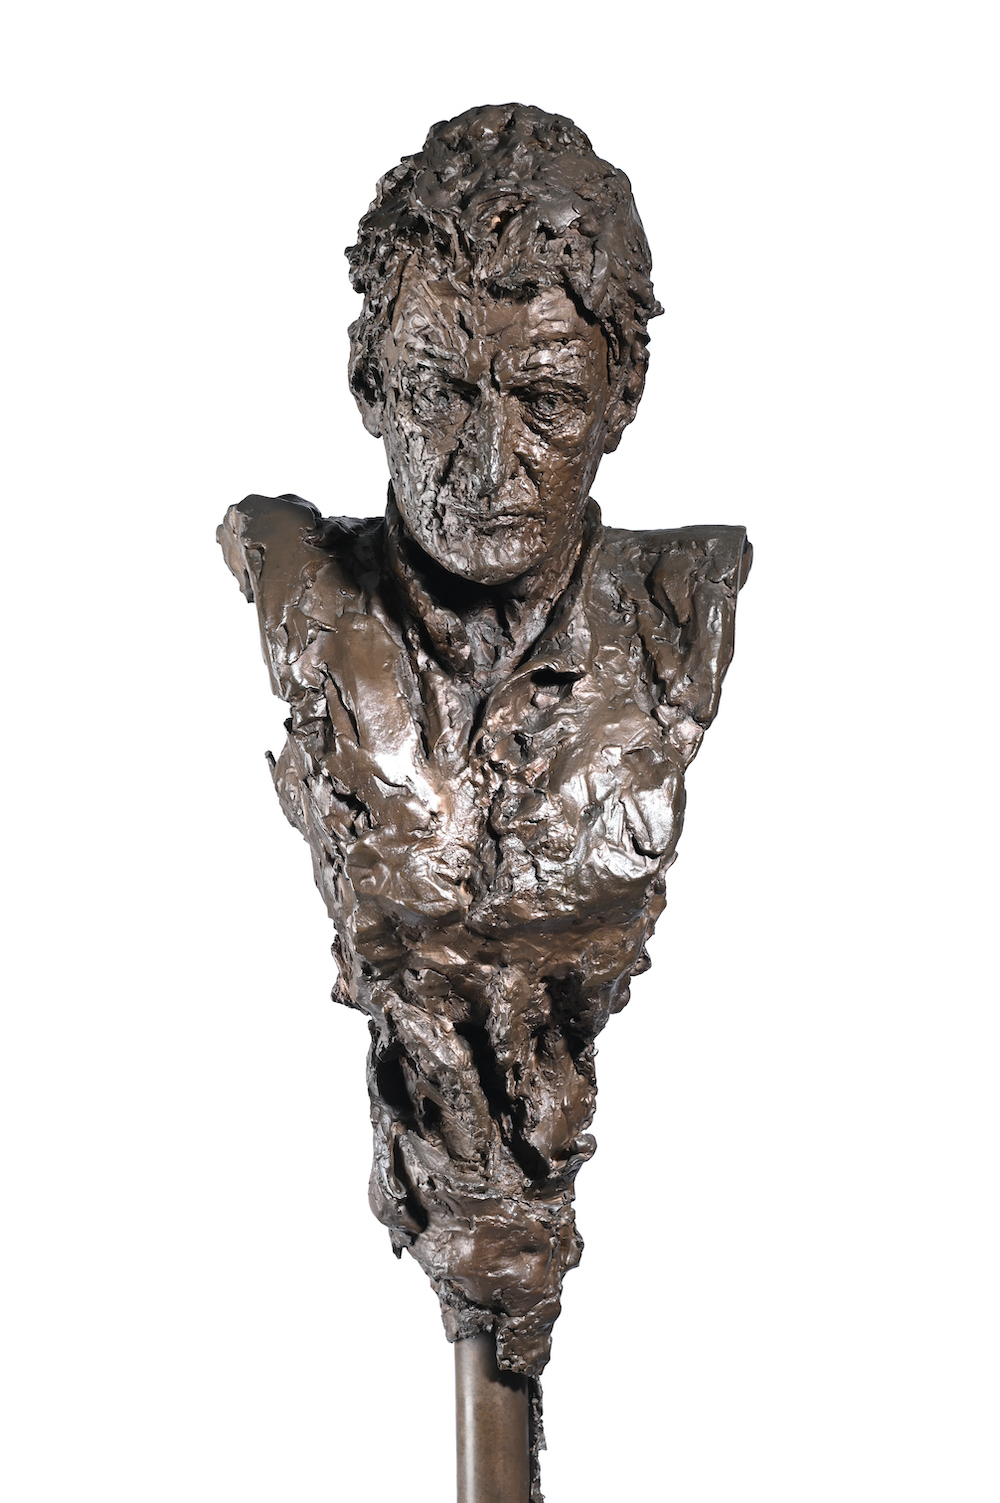 A sculpture of the artist Lucien Freud by the sculptor Angela Conner